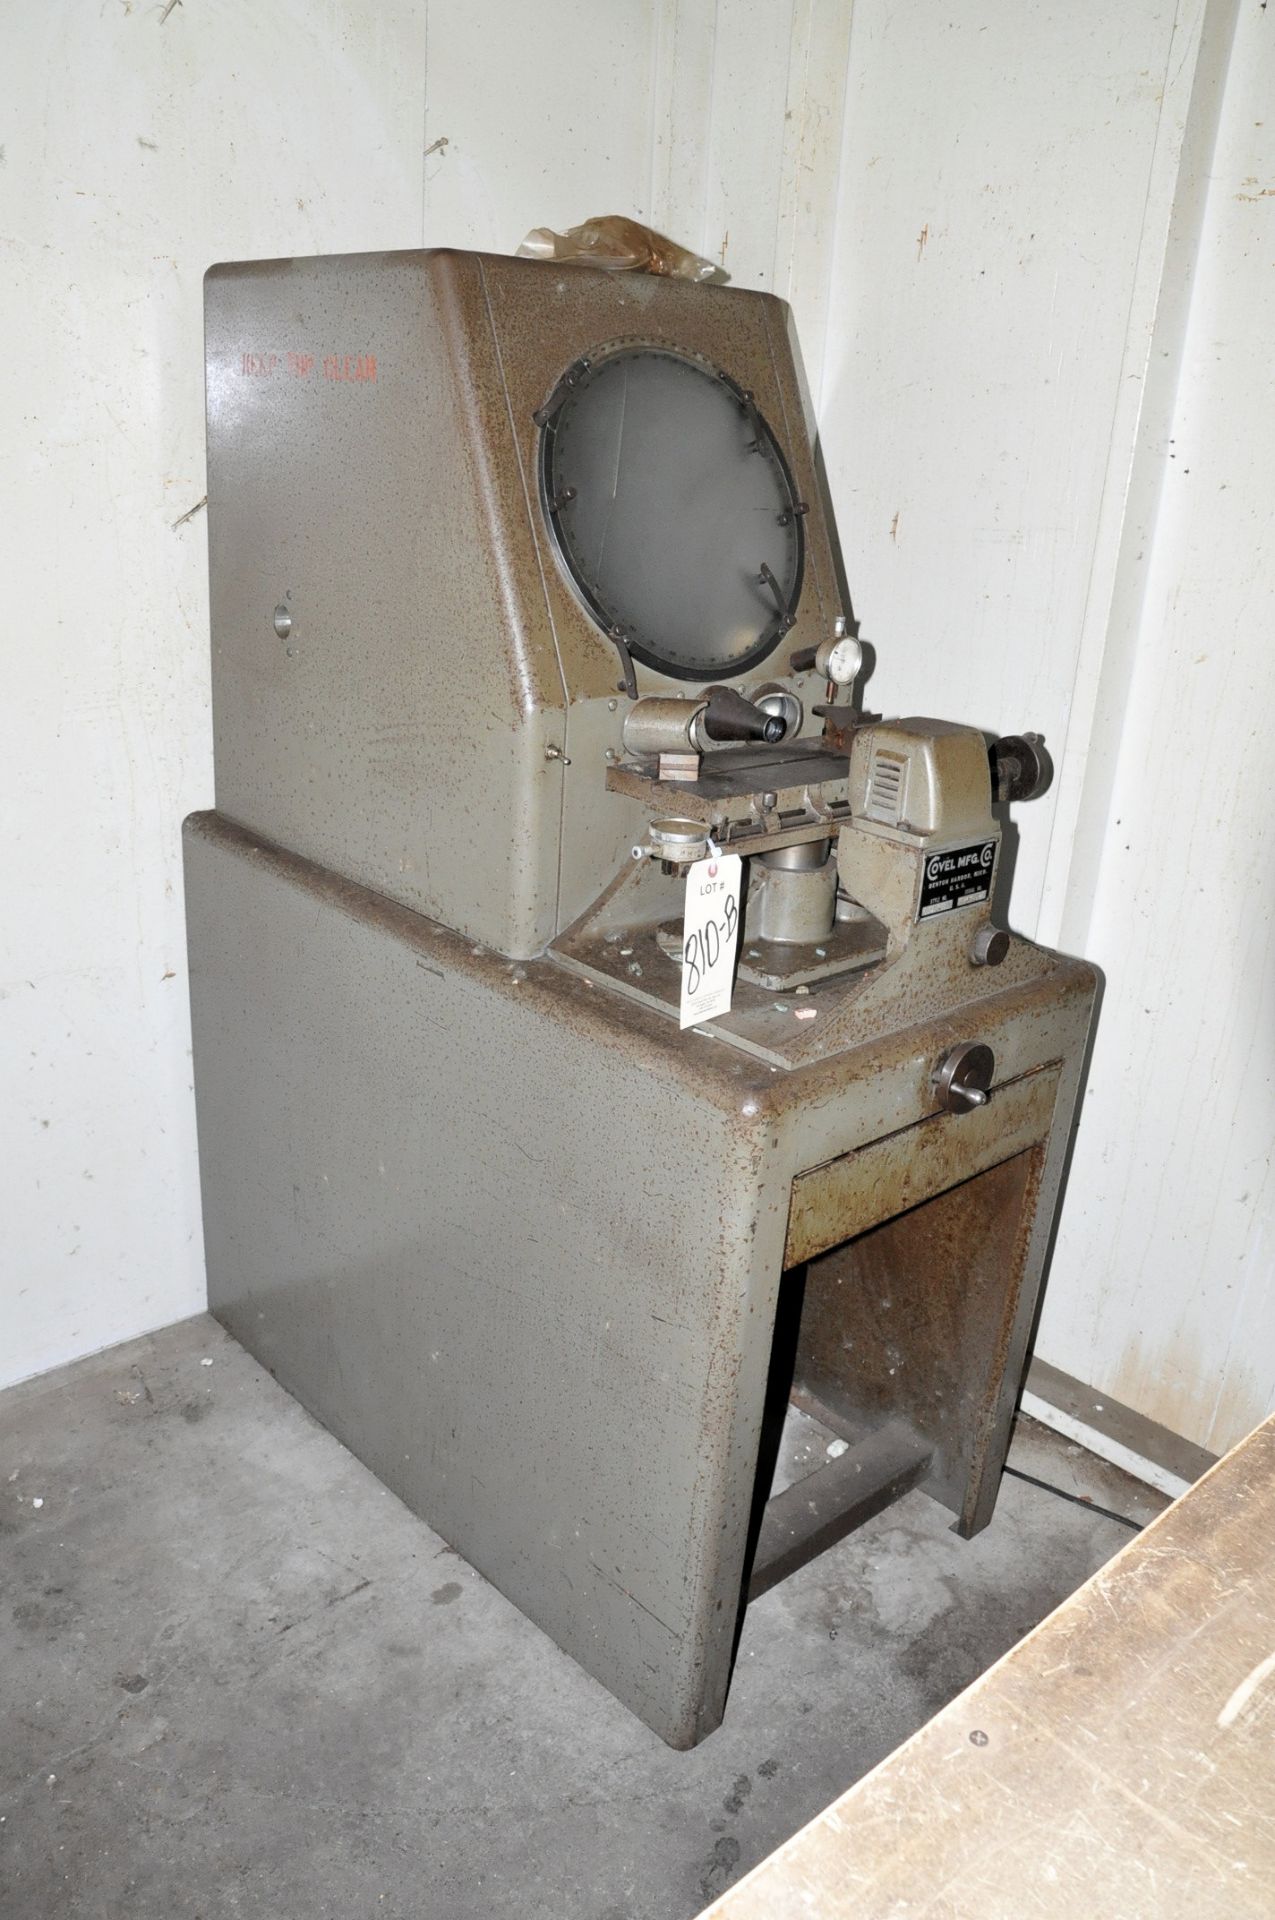 Covel Style No. 14, 14" Optical Comparator, S/n 14-1053